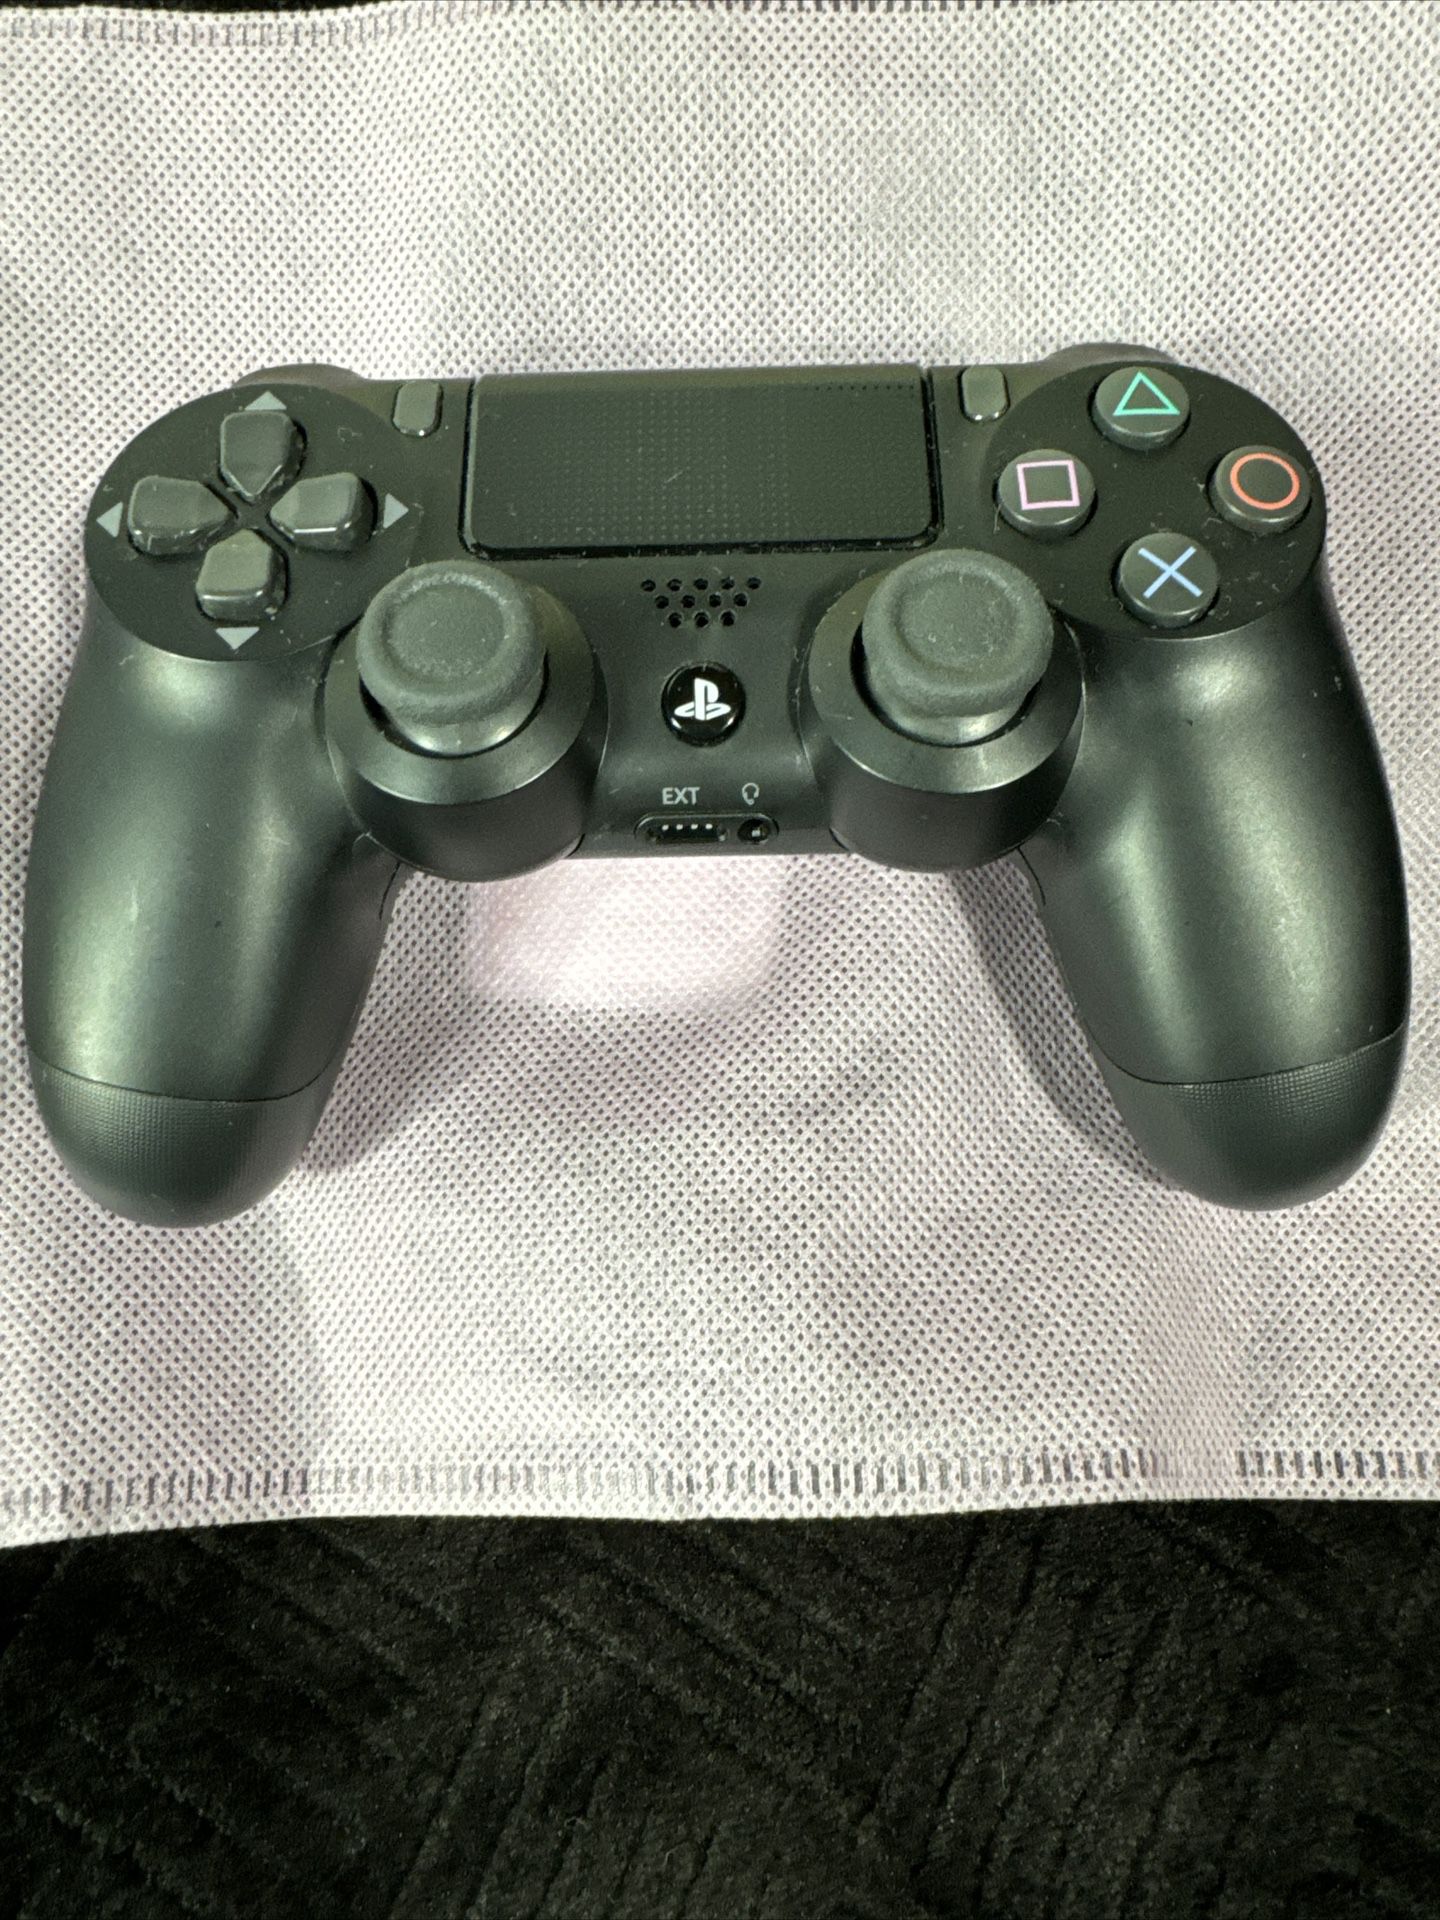 Controller For PS4 